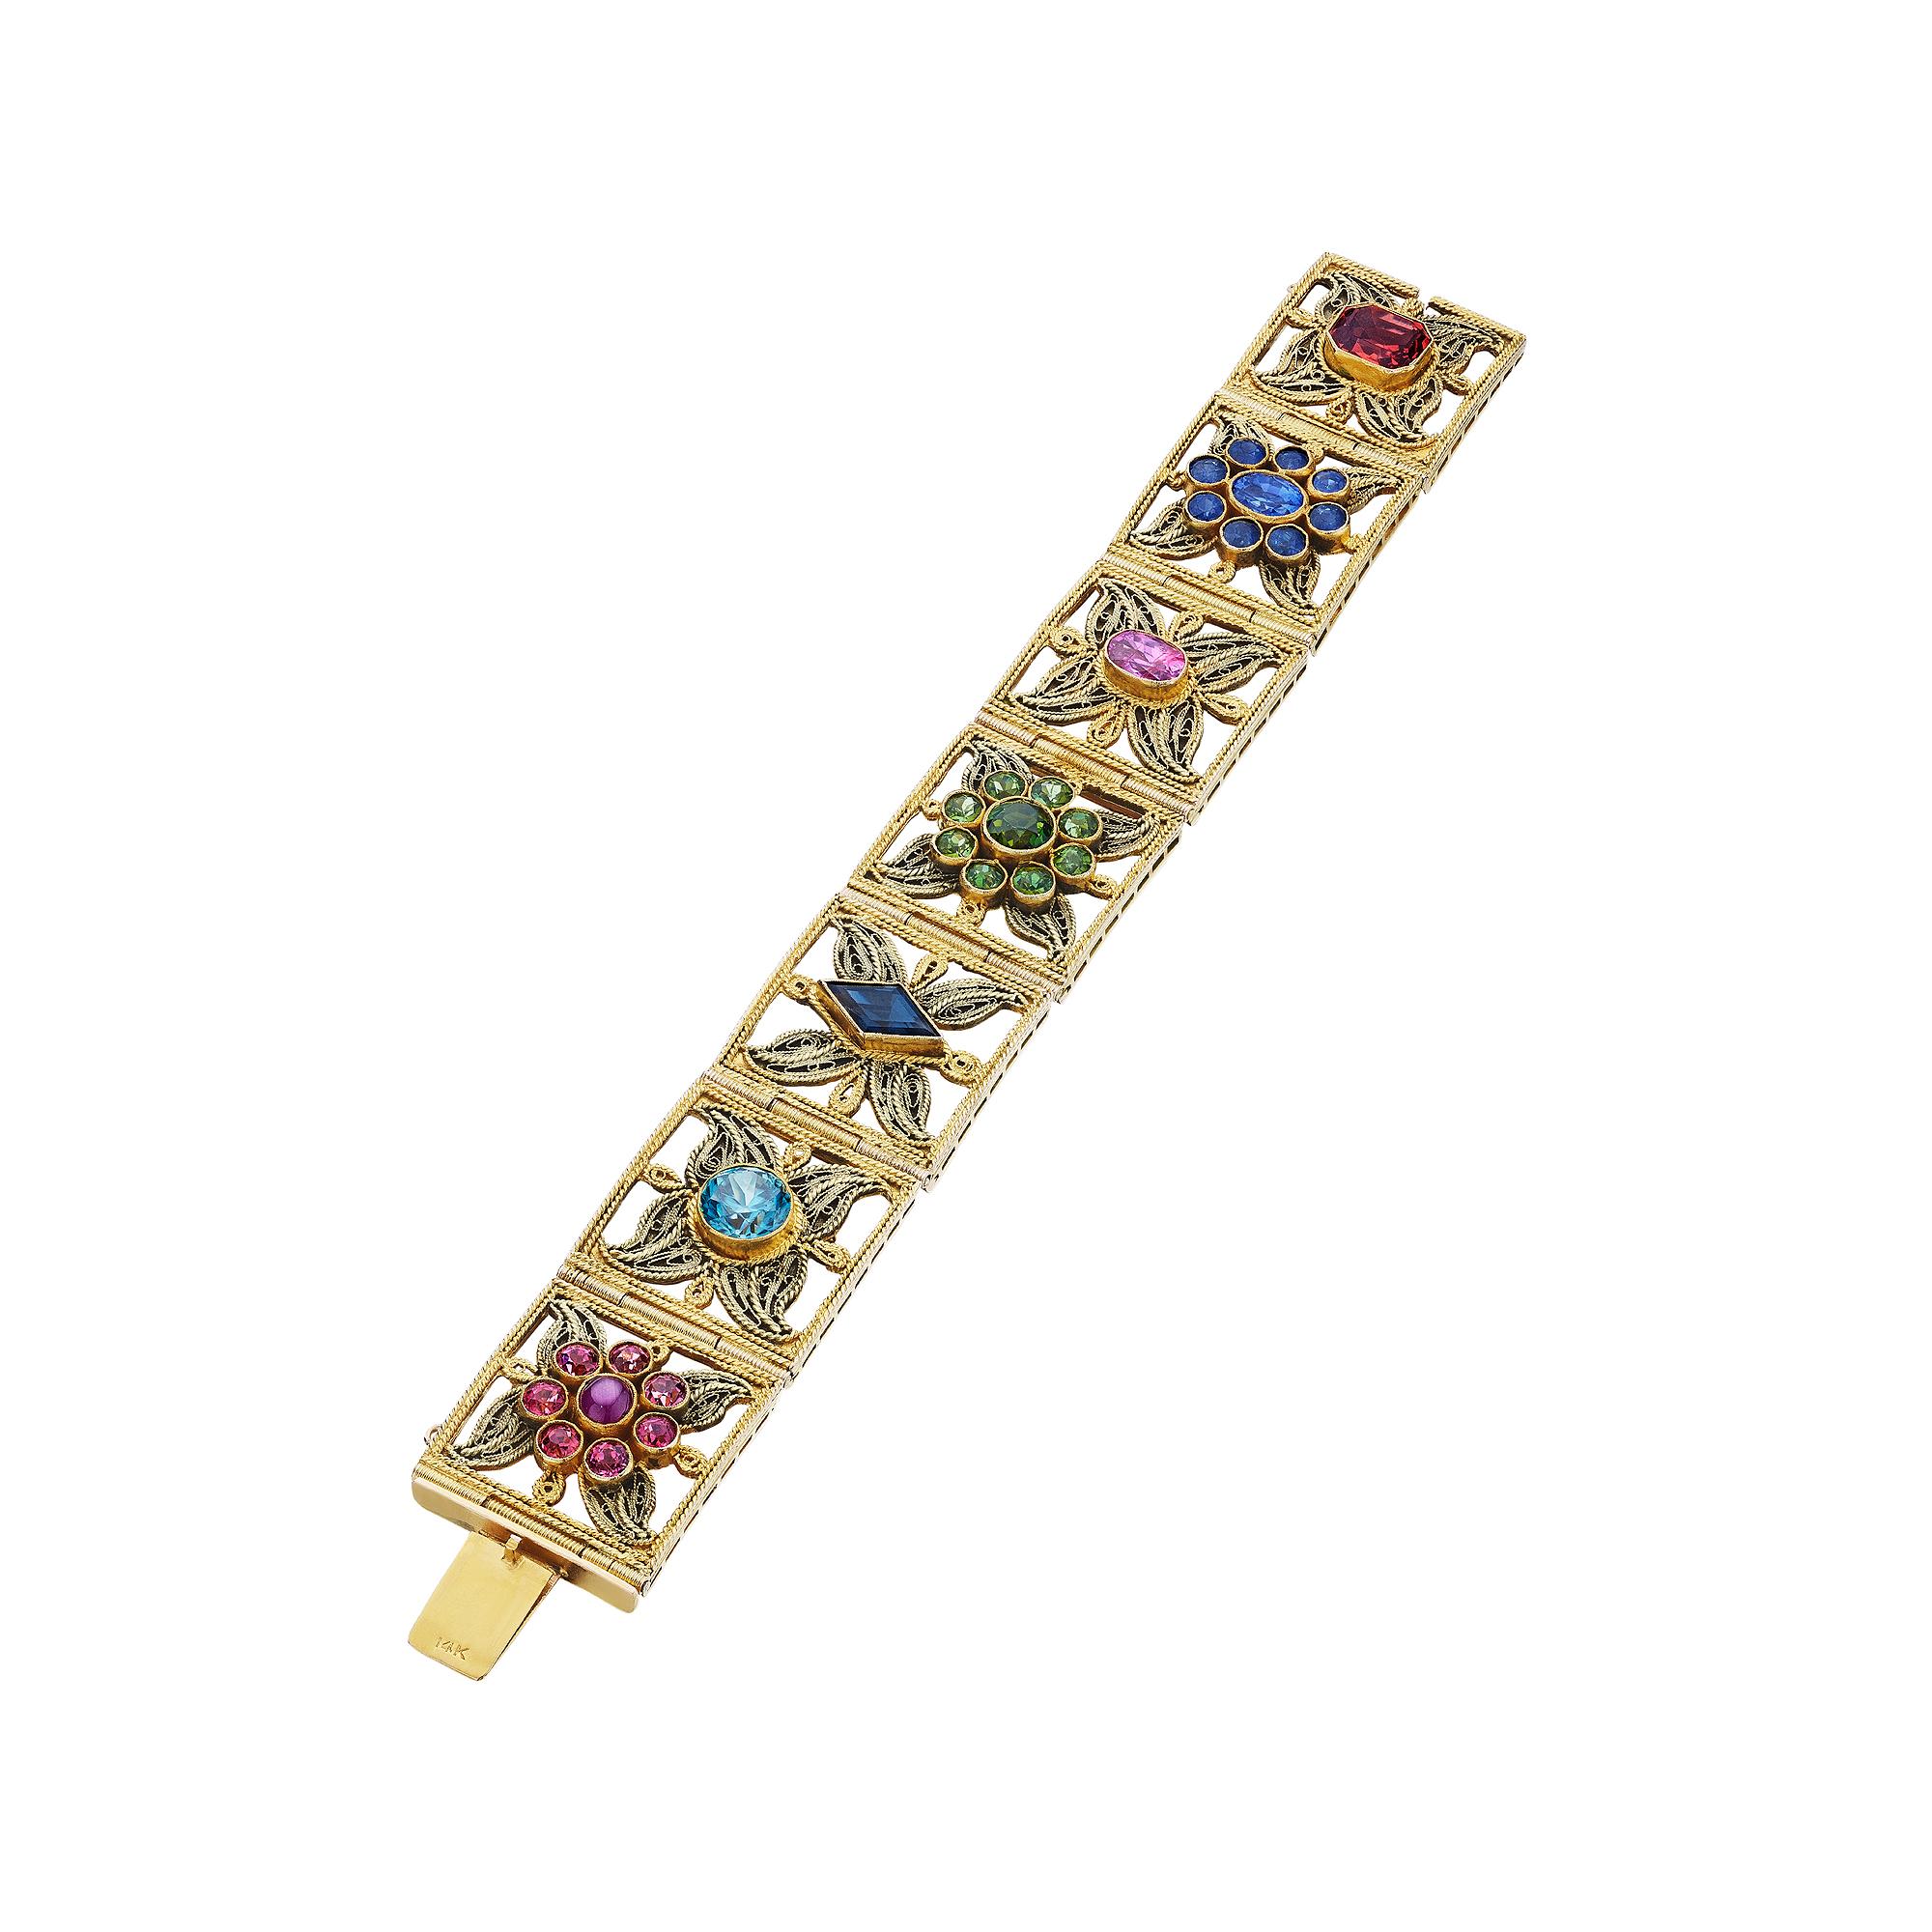 Reminiscent of a handmade one-of-a-kind Old World embroidered passementerie trim, this incredible gemstone and gold vintage bracelet looks as as though it was woven on a magical spinning wheel.  Designed with seven spun gold squares, each depicting